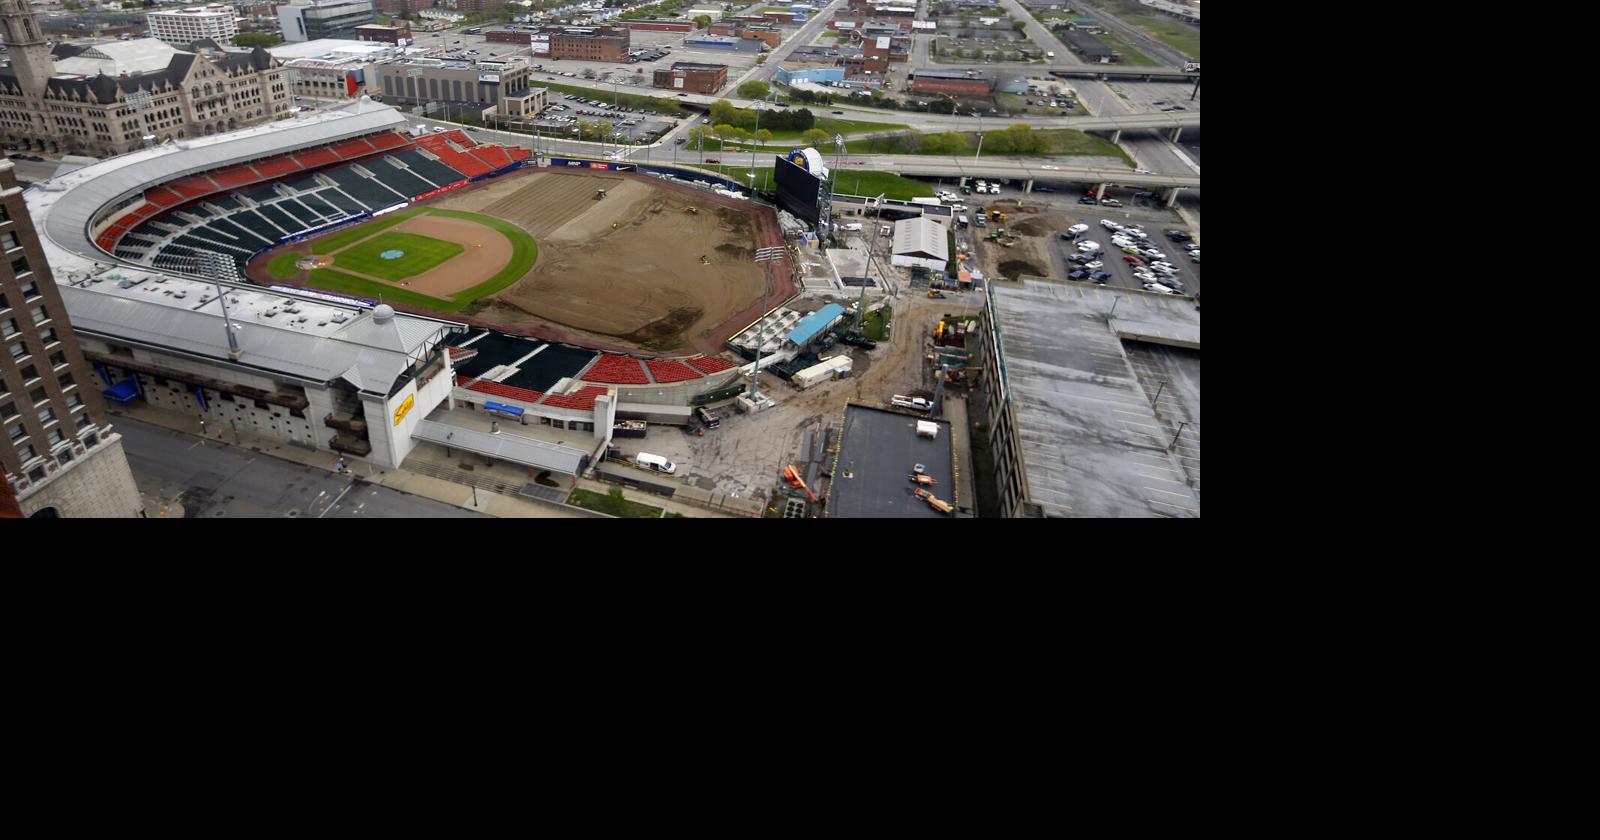 Buffalo Bisons  The Ballpark Guide